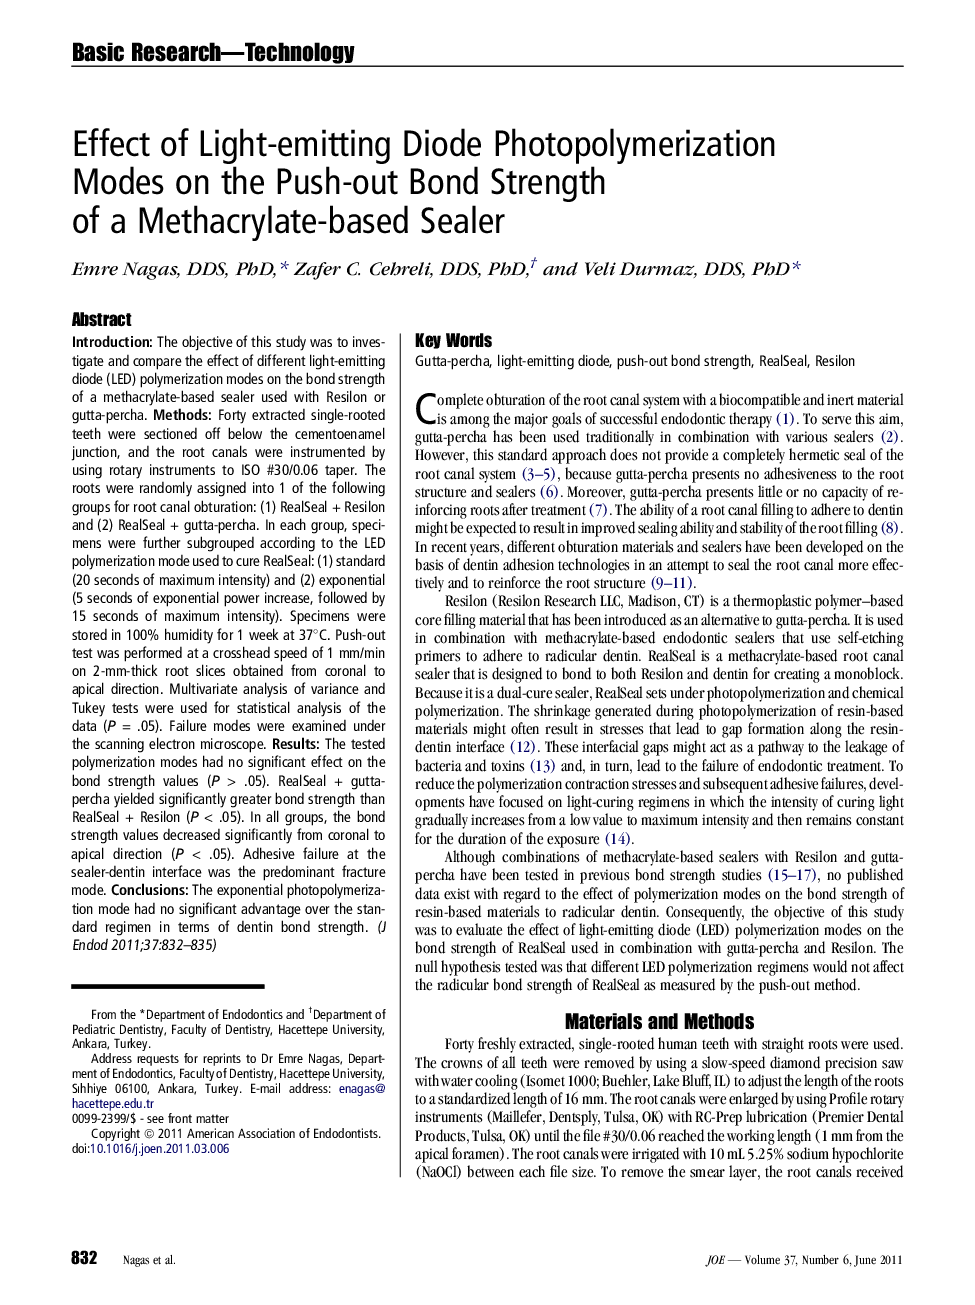 Effect of Light-emitting Diode Photopolymerization Modes on the Push-out Bond Strength of a Methacrylate-based Sealer